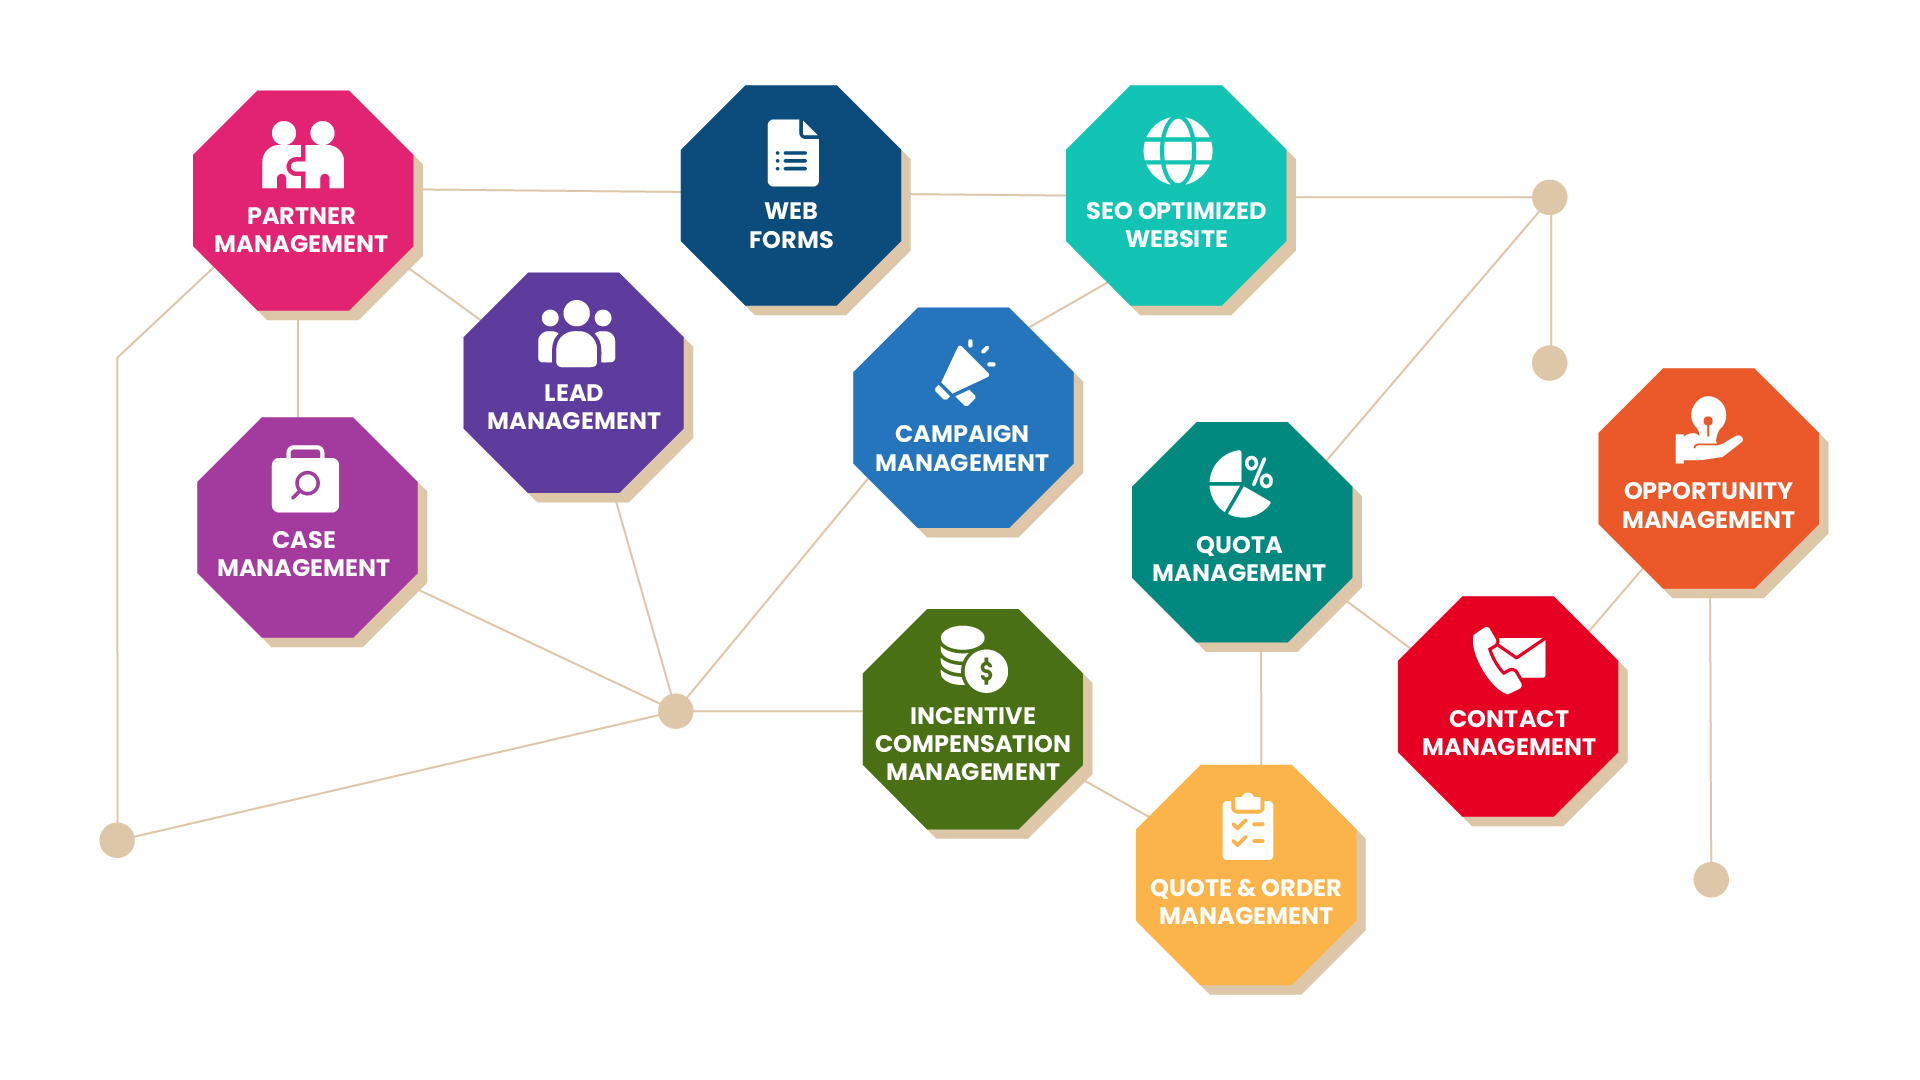 alt="NetSuite CRM analytics and reporting"